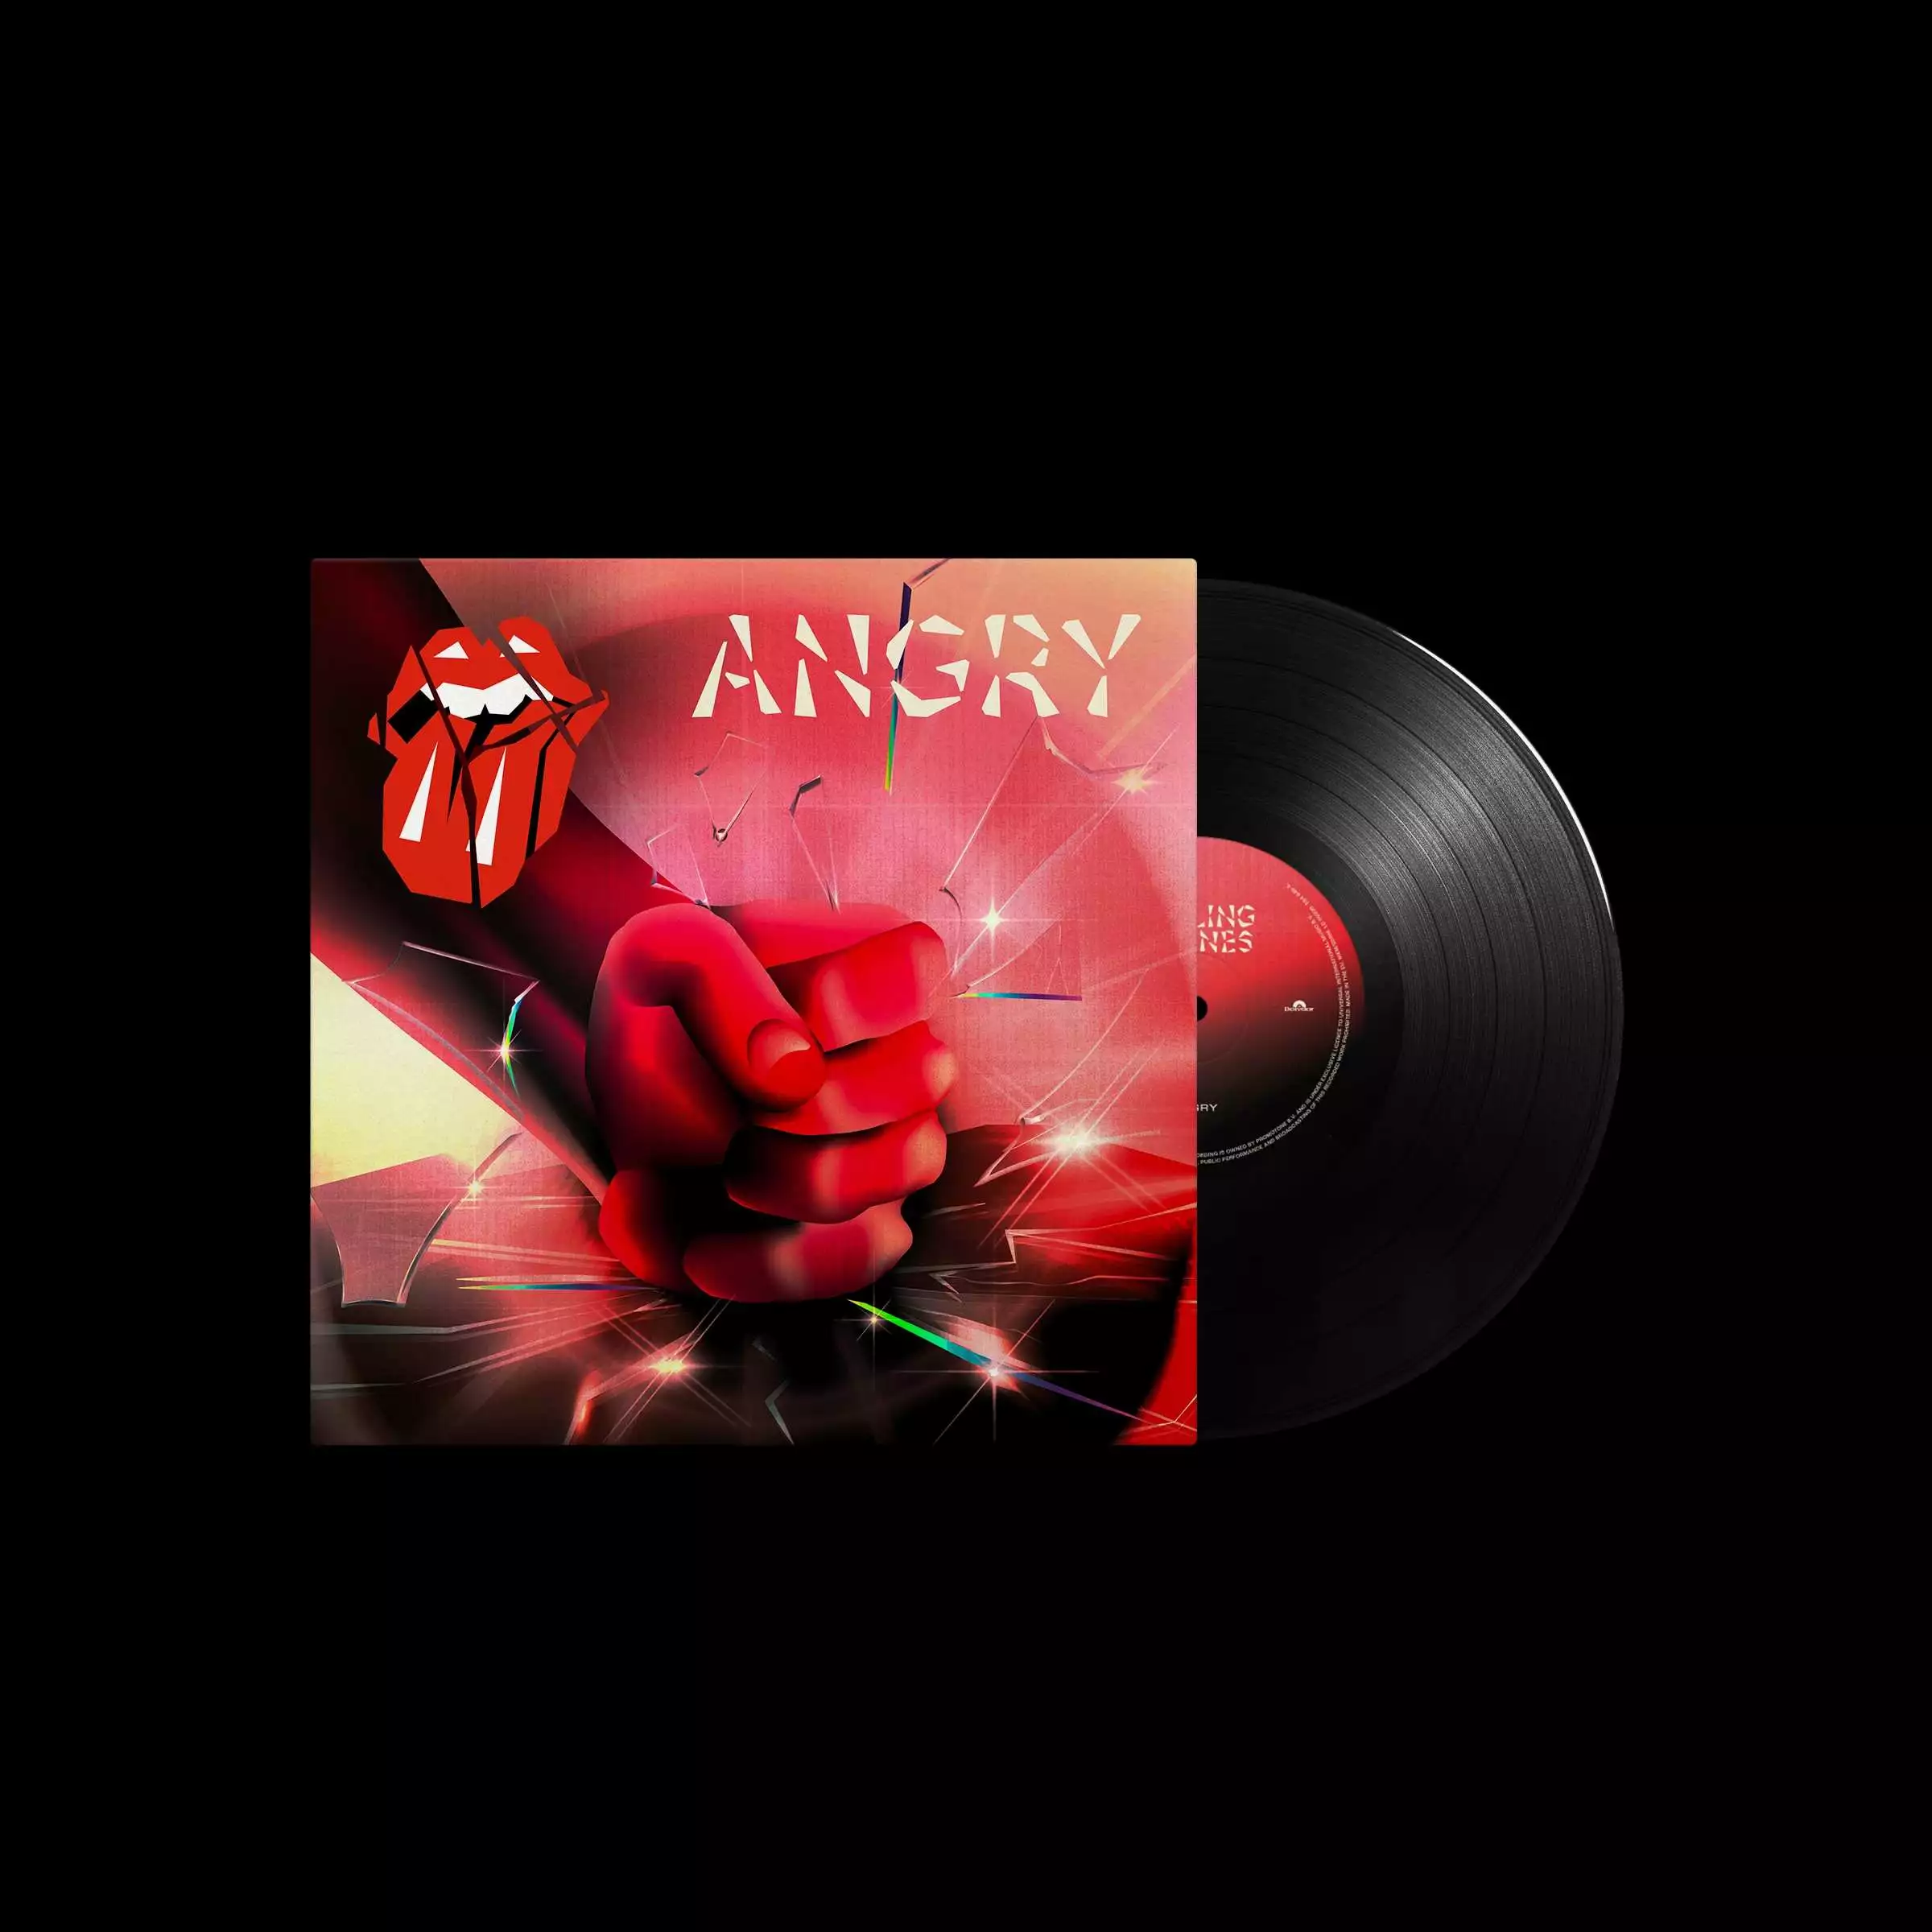 THE ROLLING STONES - Angry [10" MLP]